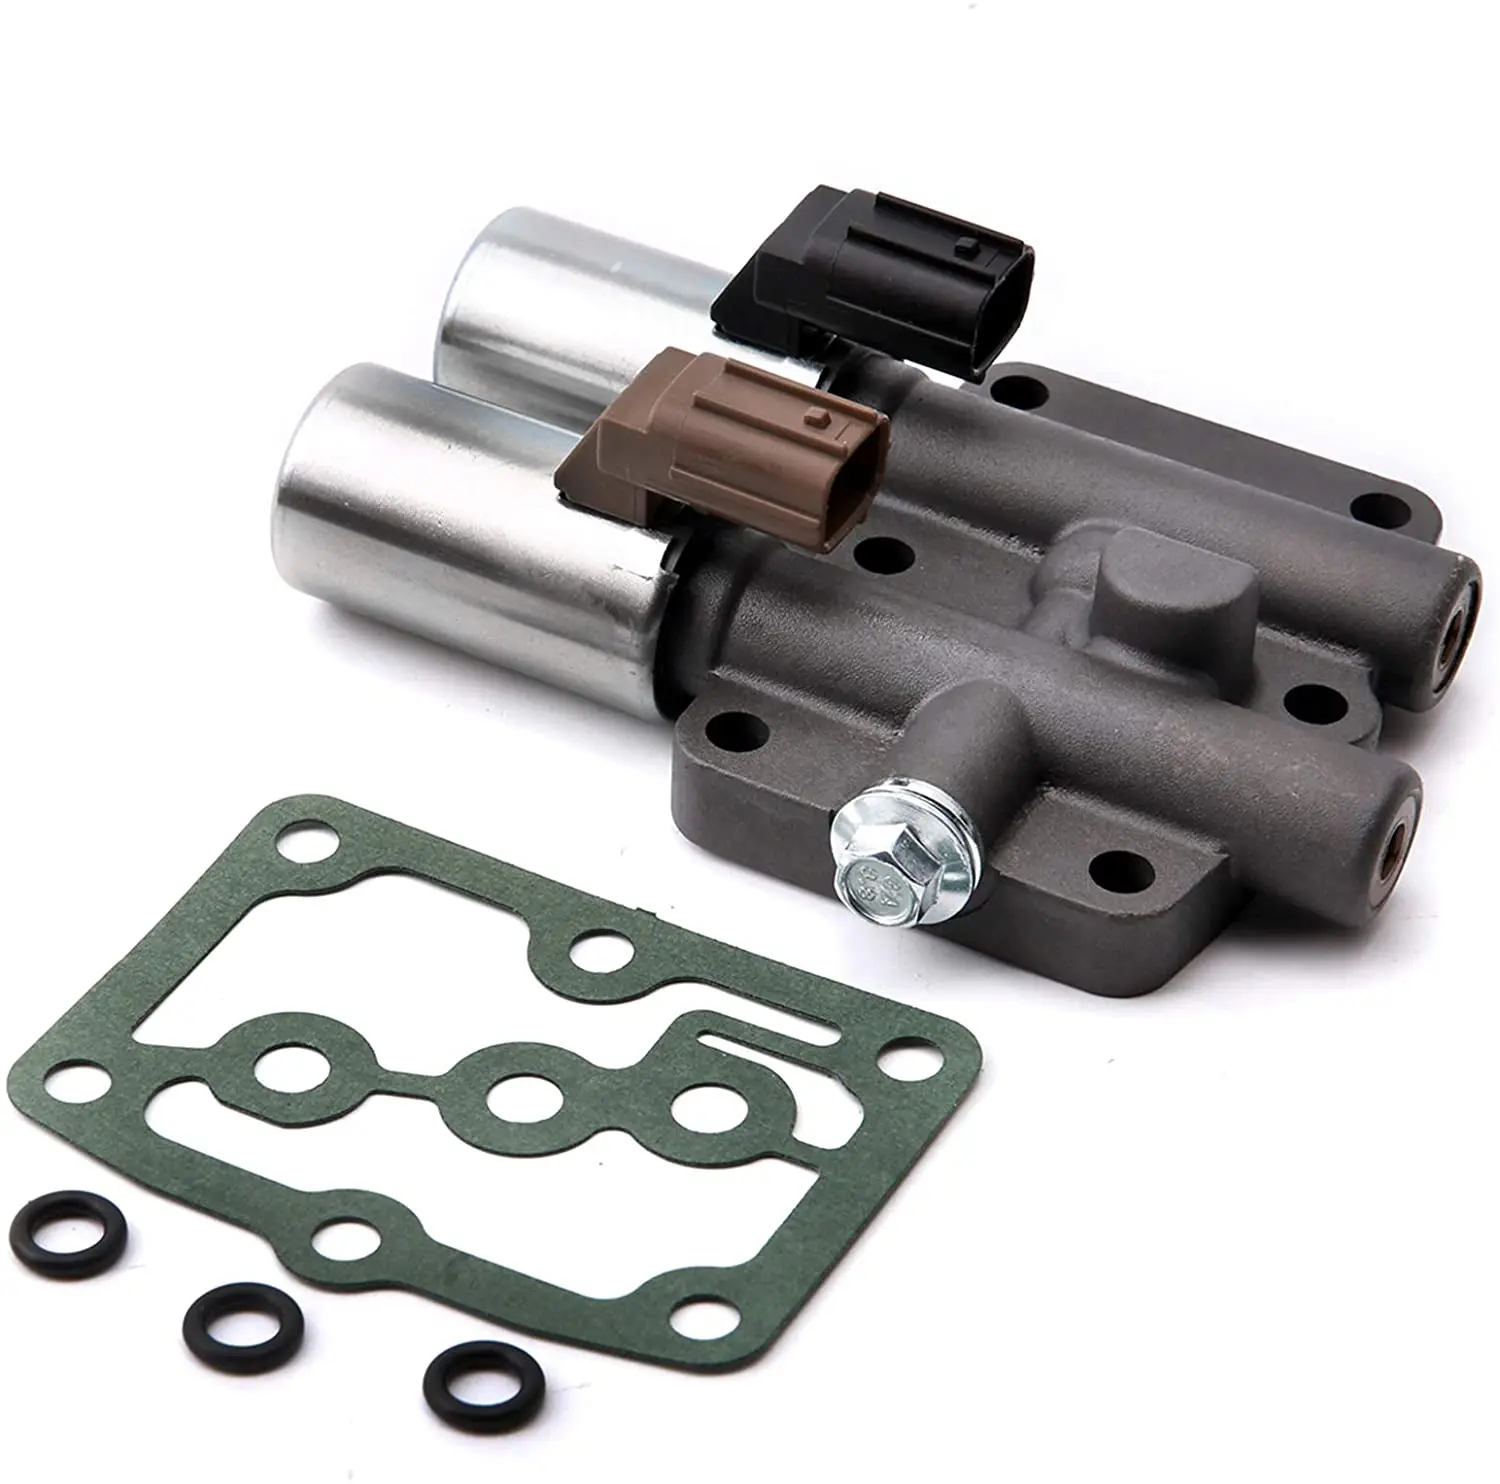 28250-P6H-024 28250P6H024 Transmission Dual Linear Solenoid with 1PCS Gasket and 3PCS O-Rings for Honda Accord Odyssey MDX 